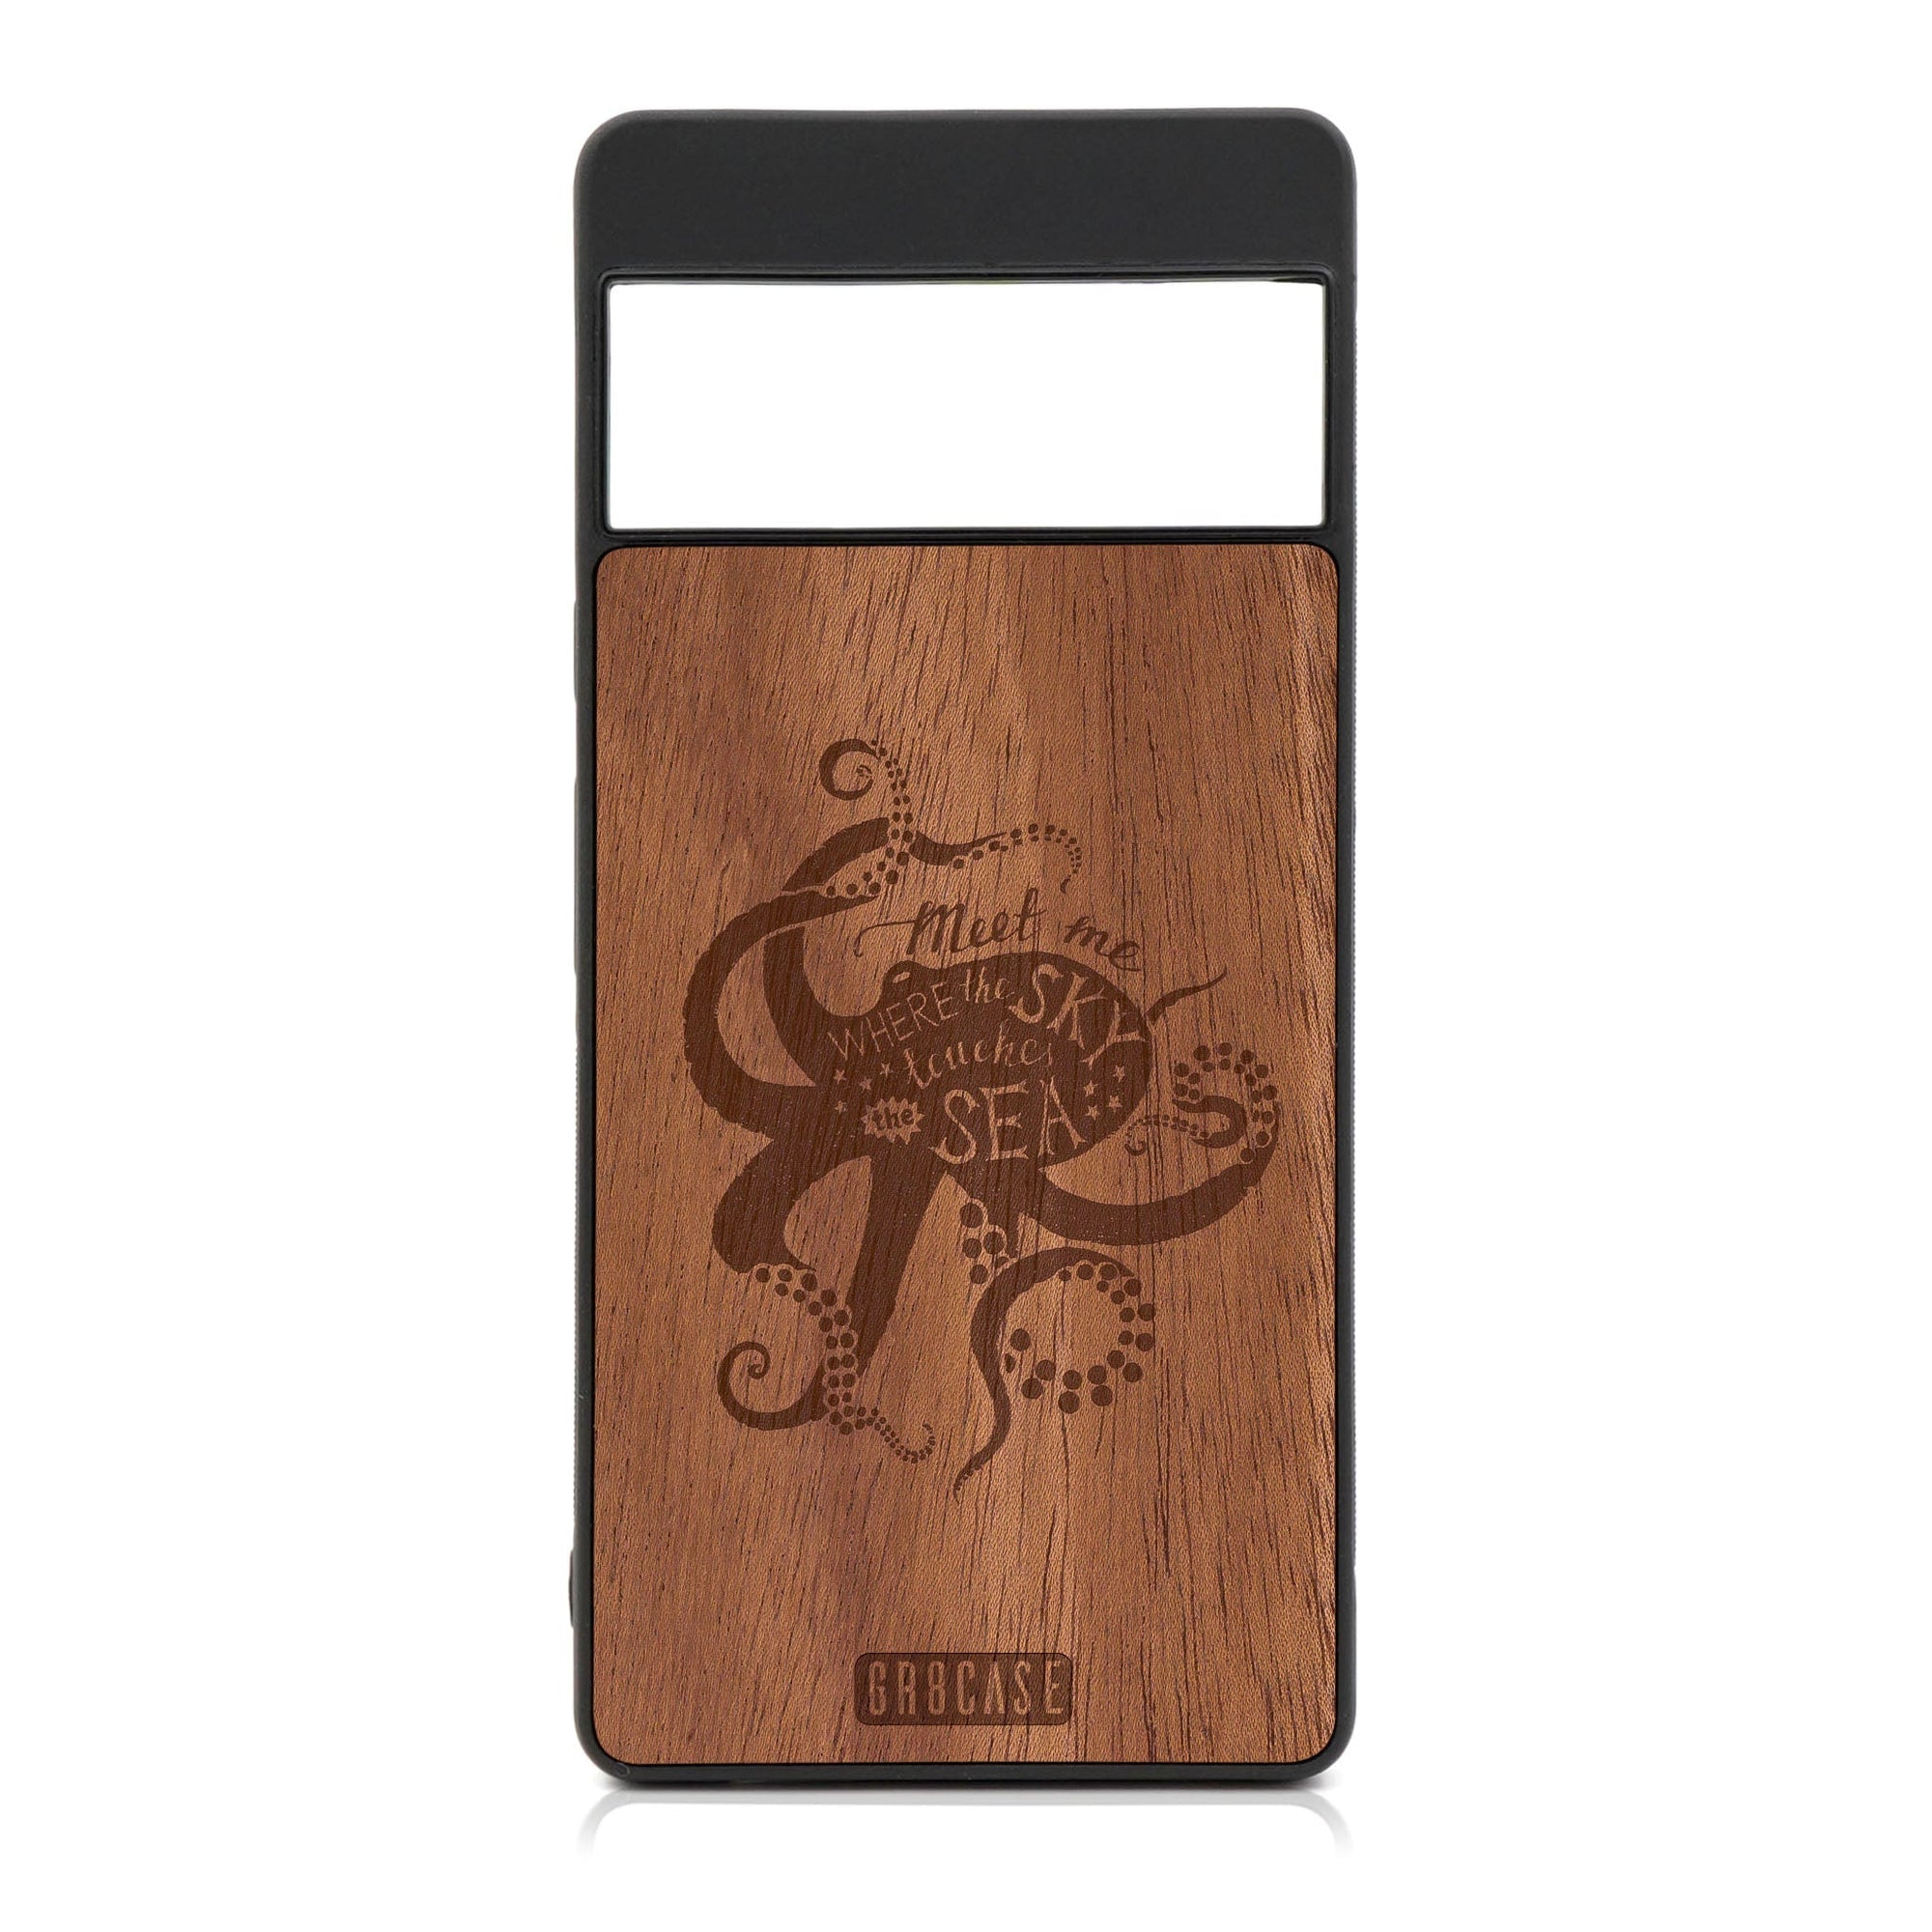 Meet Me Where The Sky Touches The Sea (Octopus) Design Wood Case For Google Pixel 7 Pro